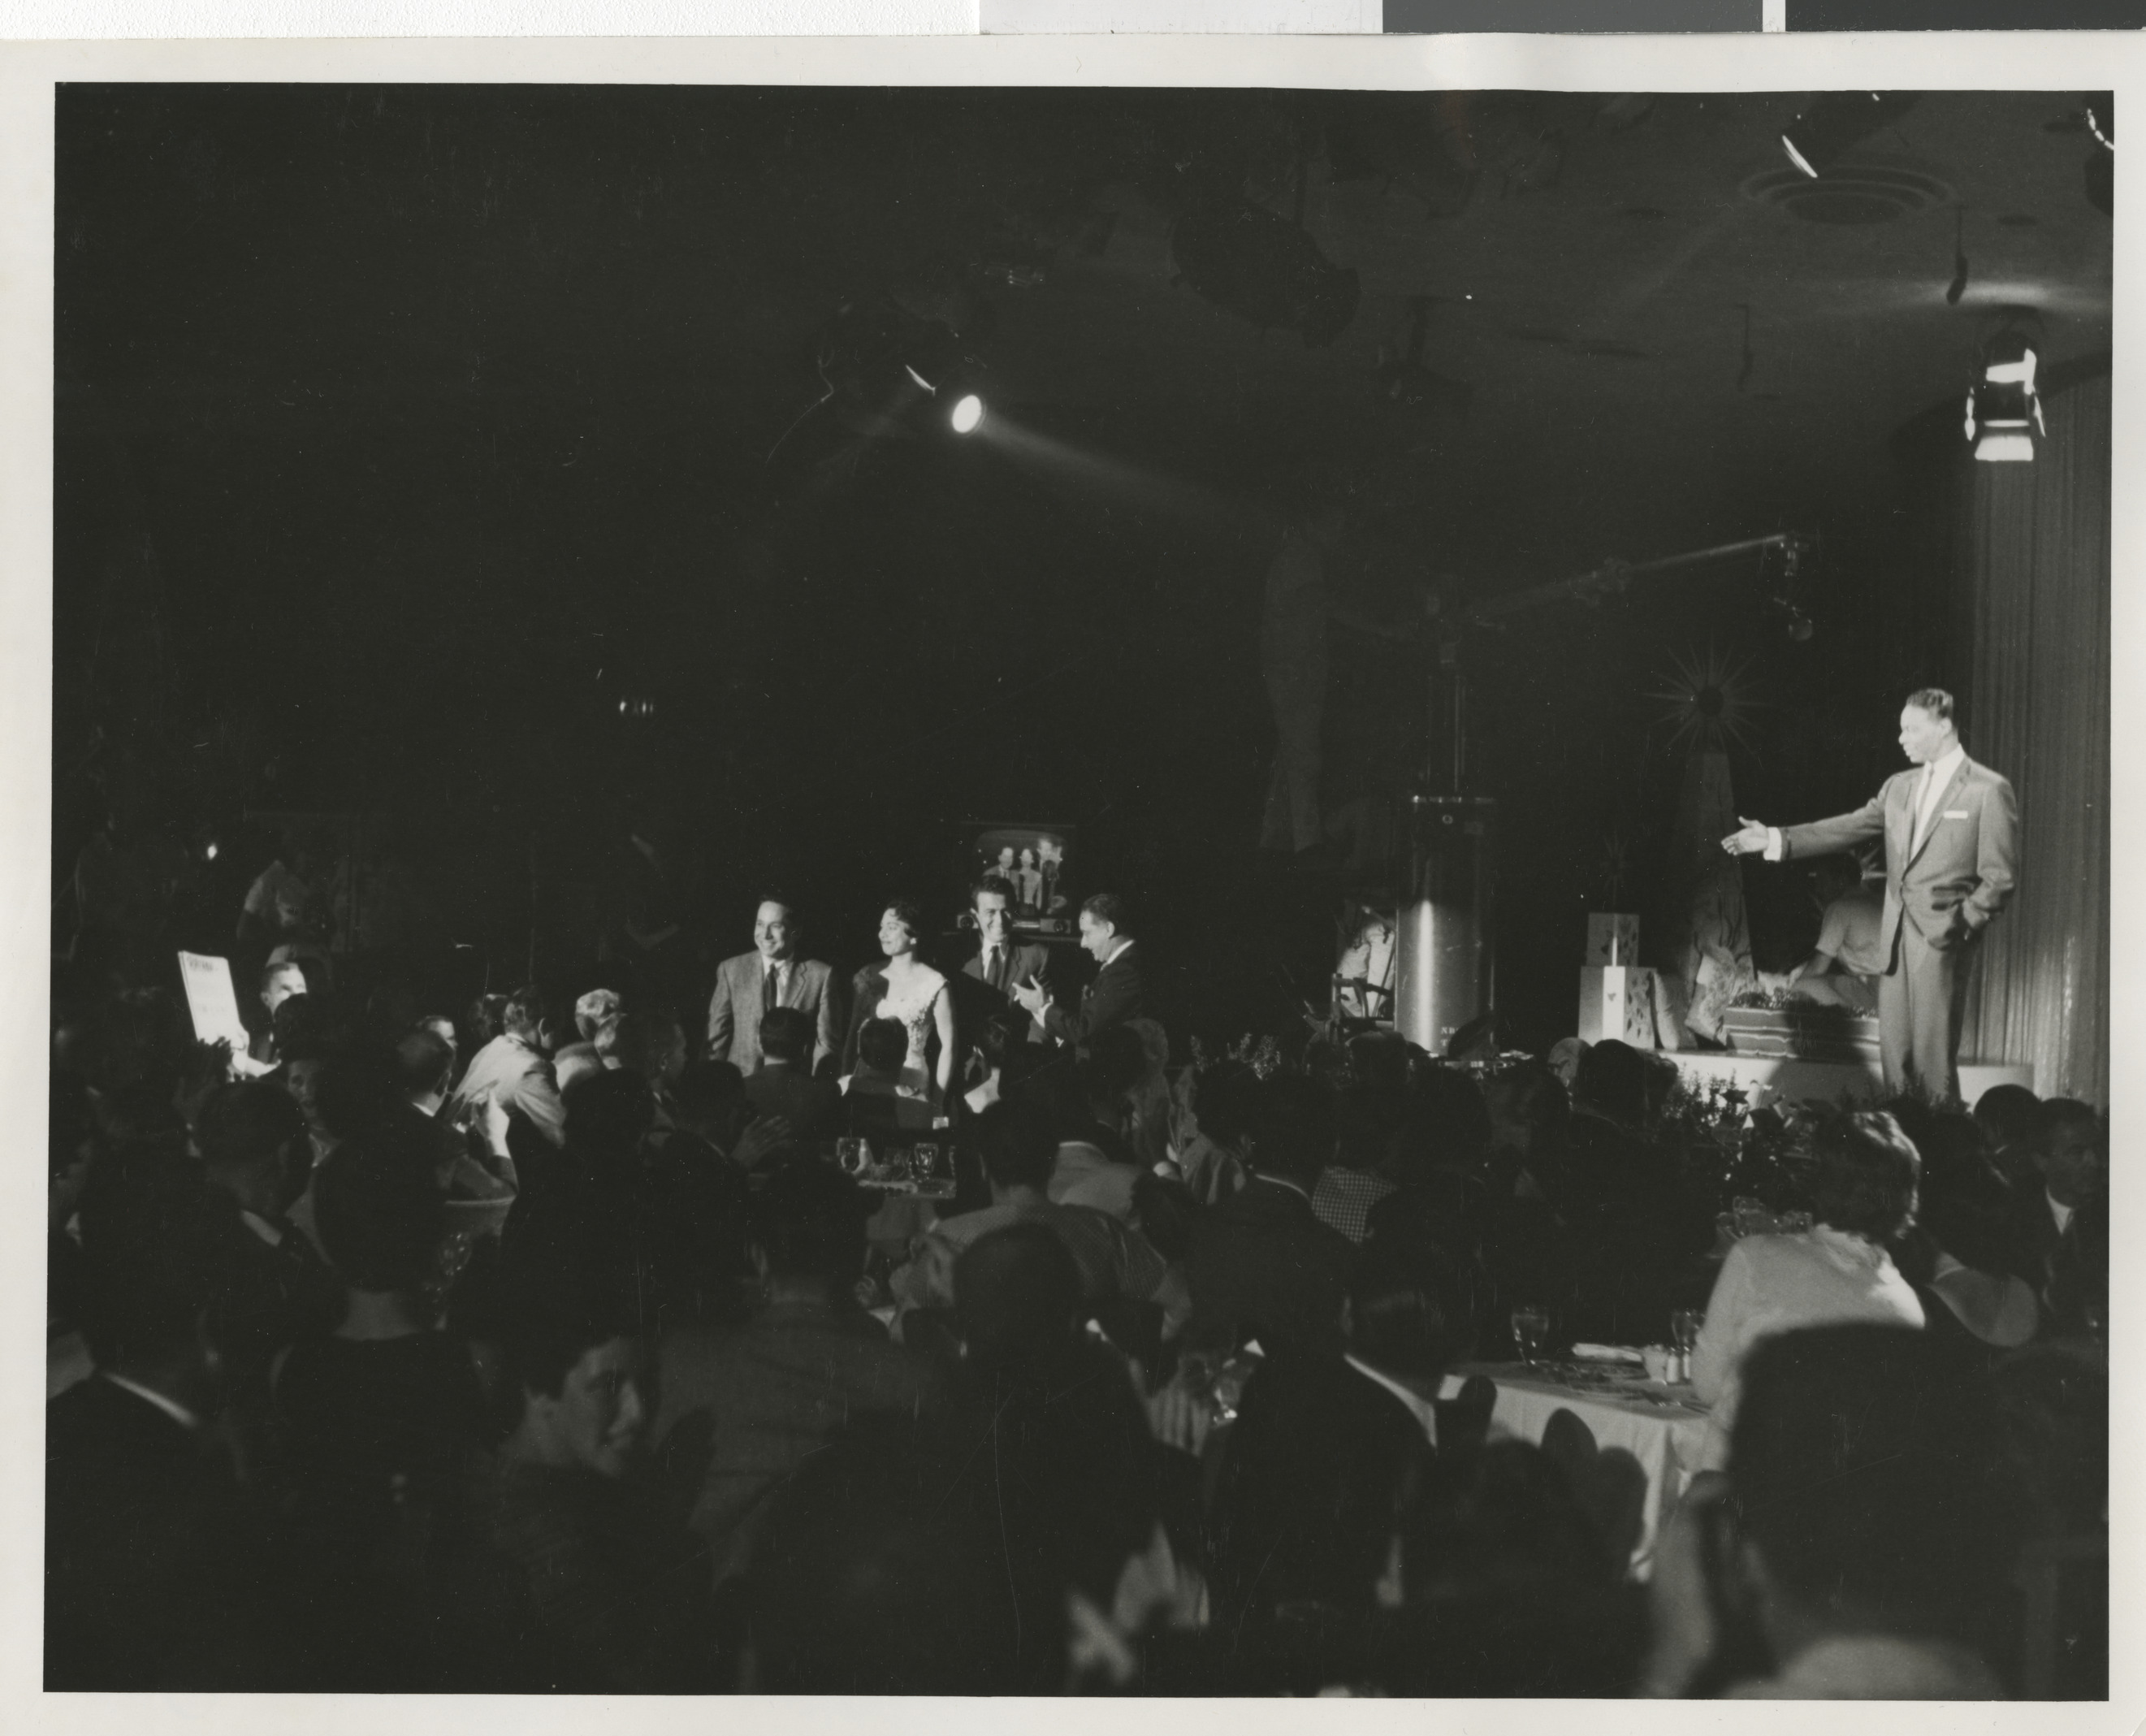 Cole onstage, image 054